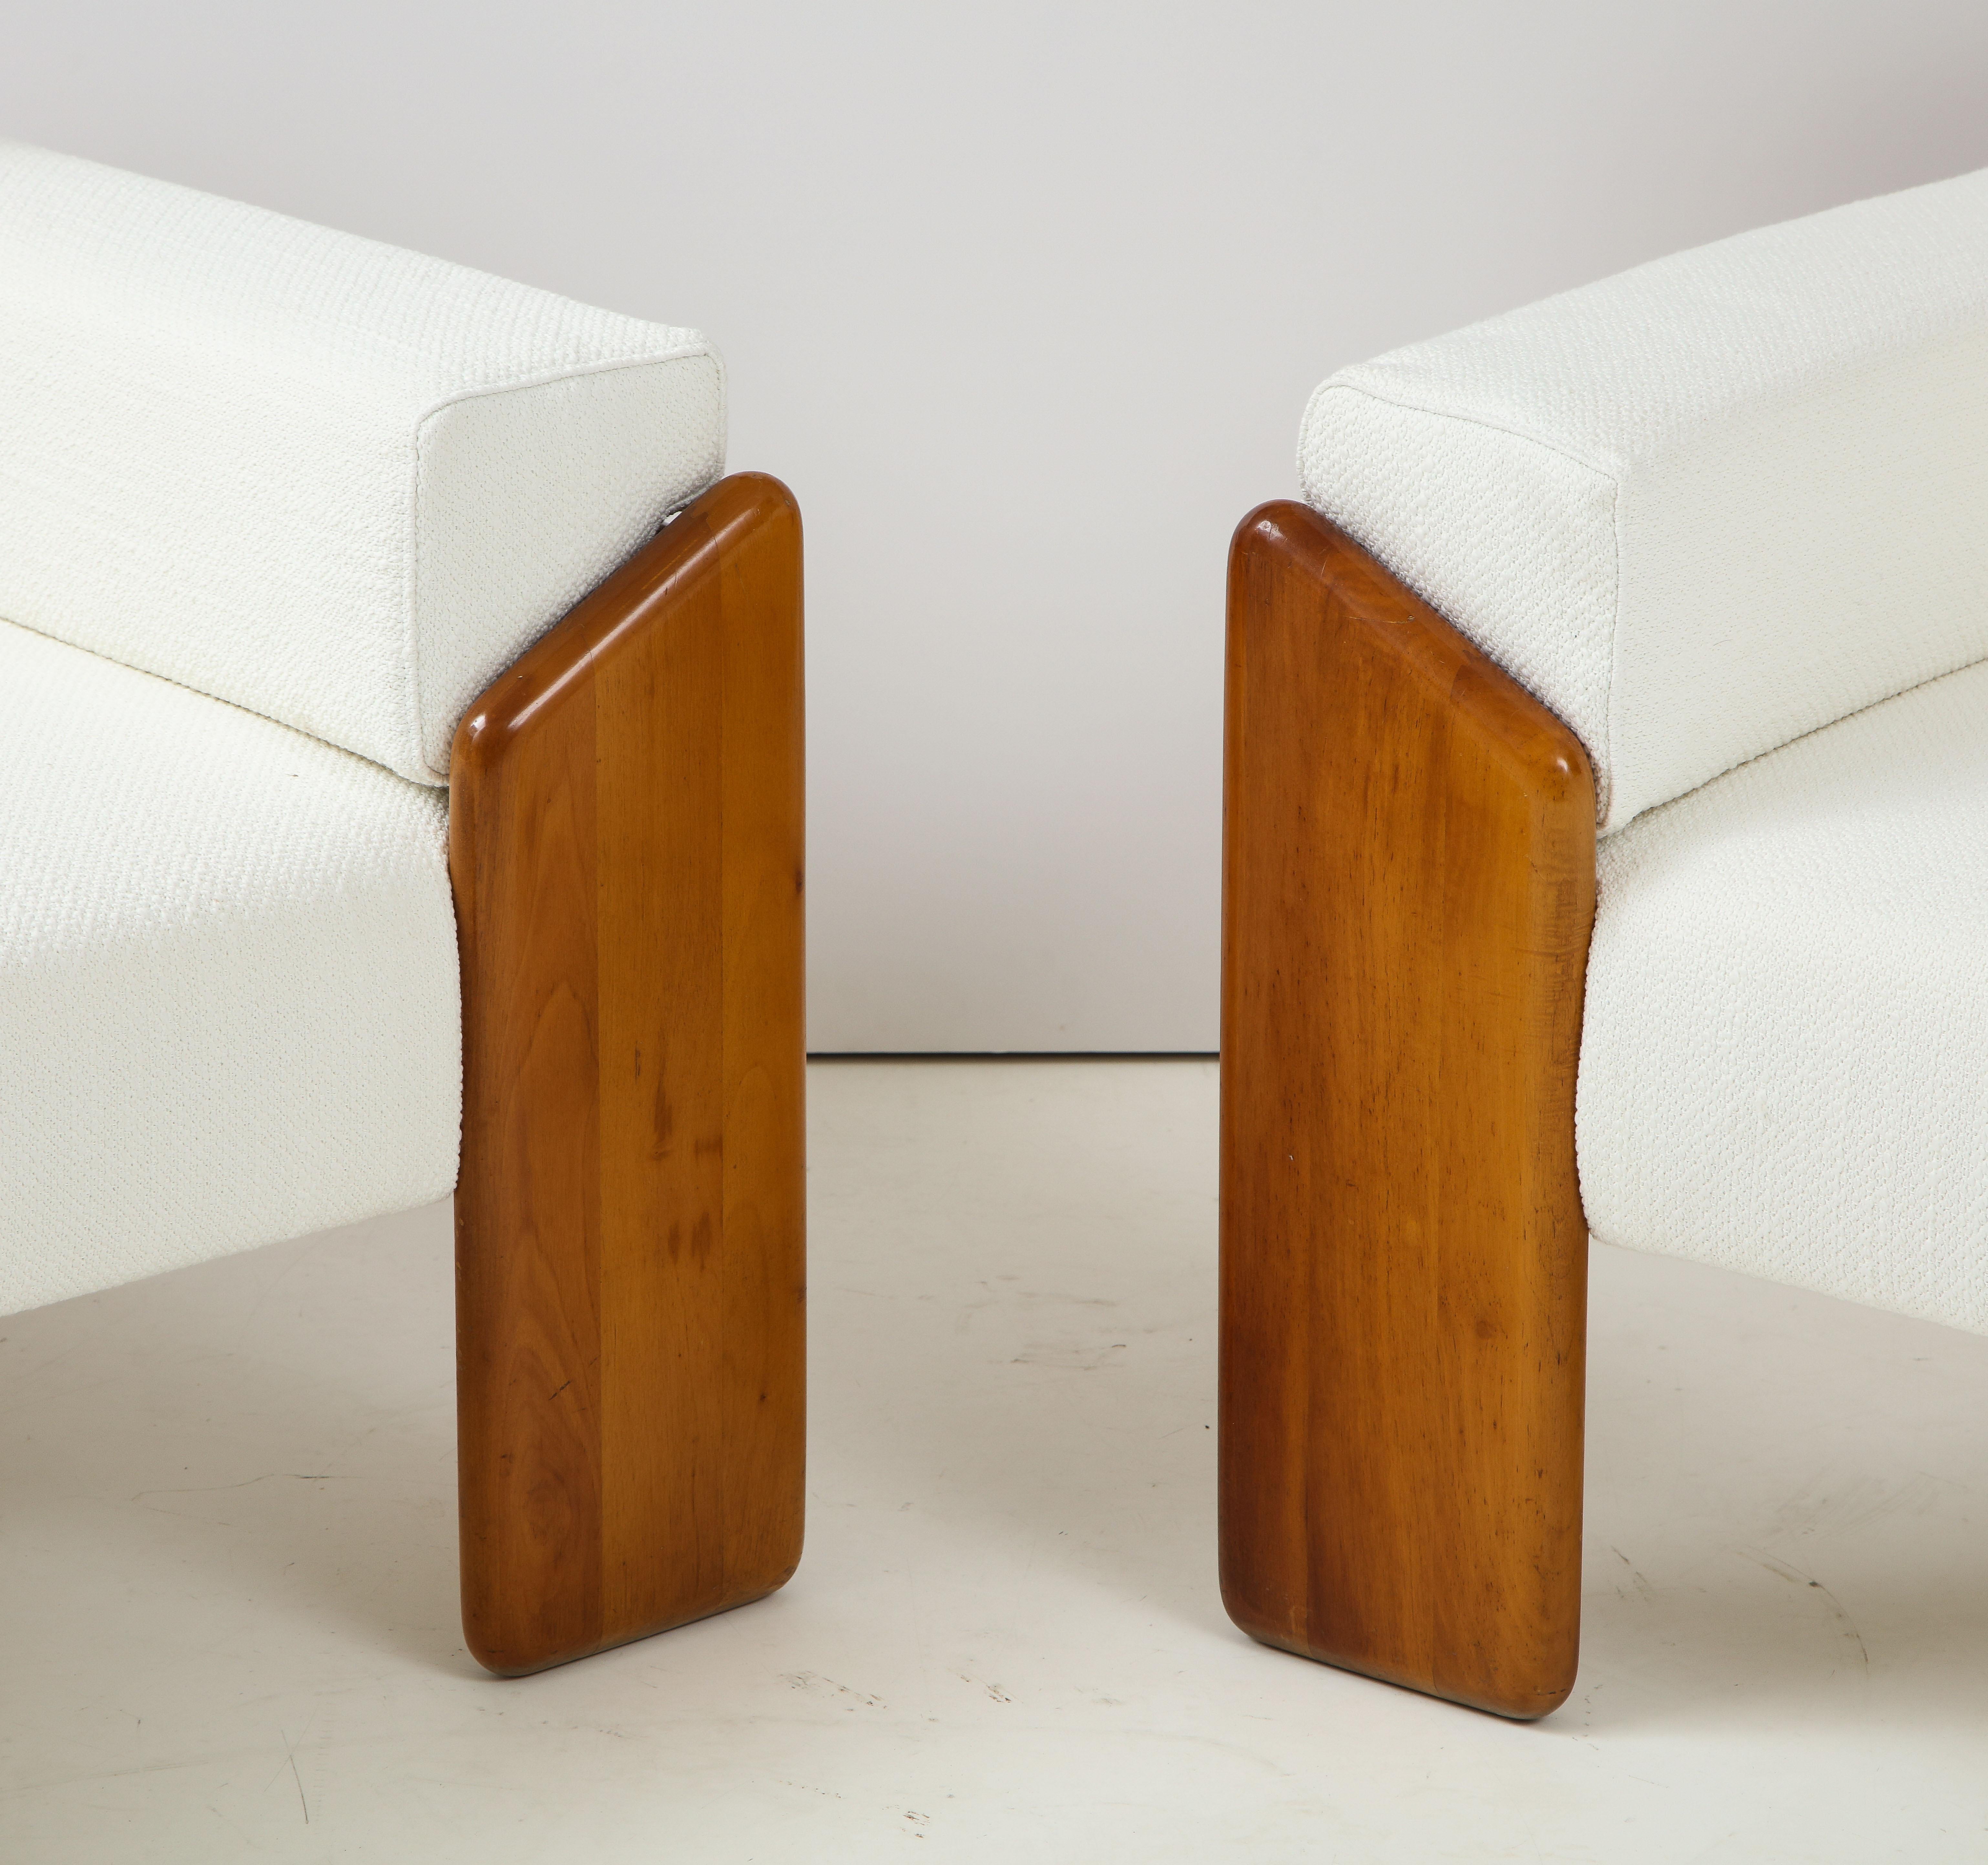 A pair of walnut armchairs by Sapporo for Mobil Girgi, made in the 1970's, Italy. Stamped. Beautifully designed with angled front legs which extend to the sides and back of the chairs, the back support is slightly curved. The flat upholstered arms